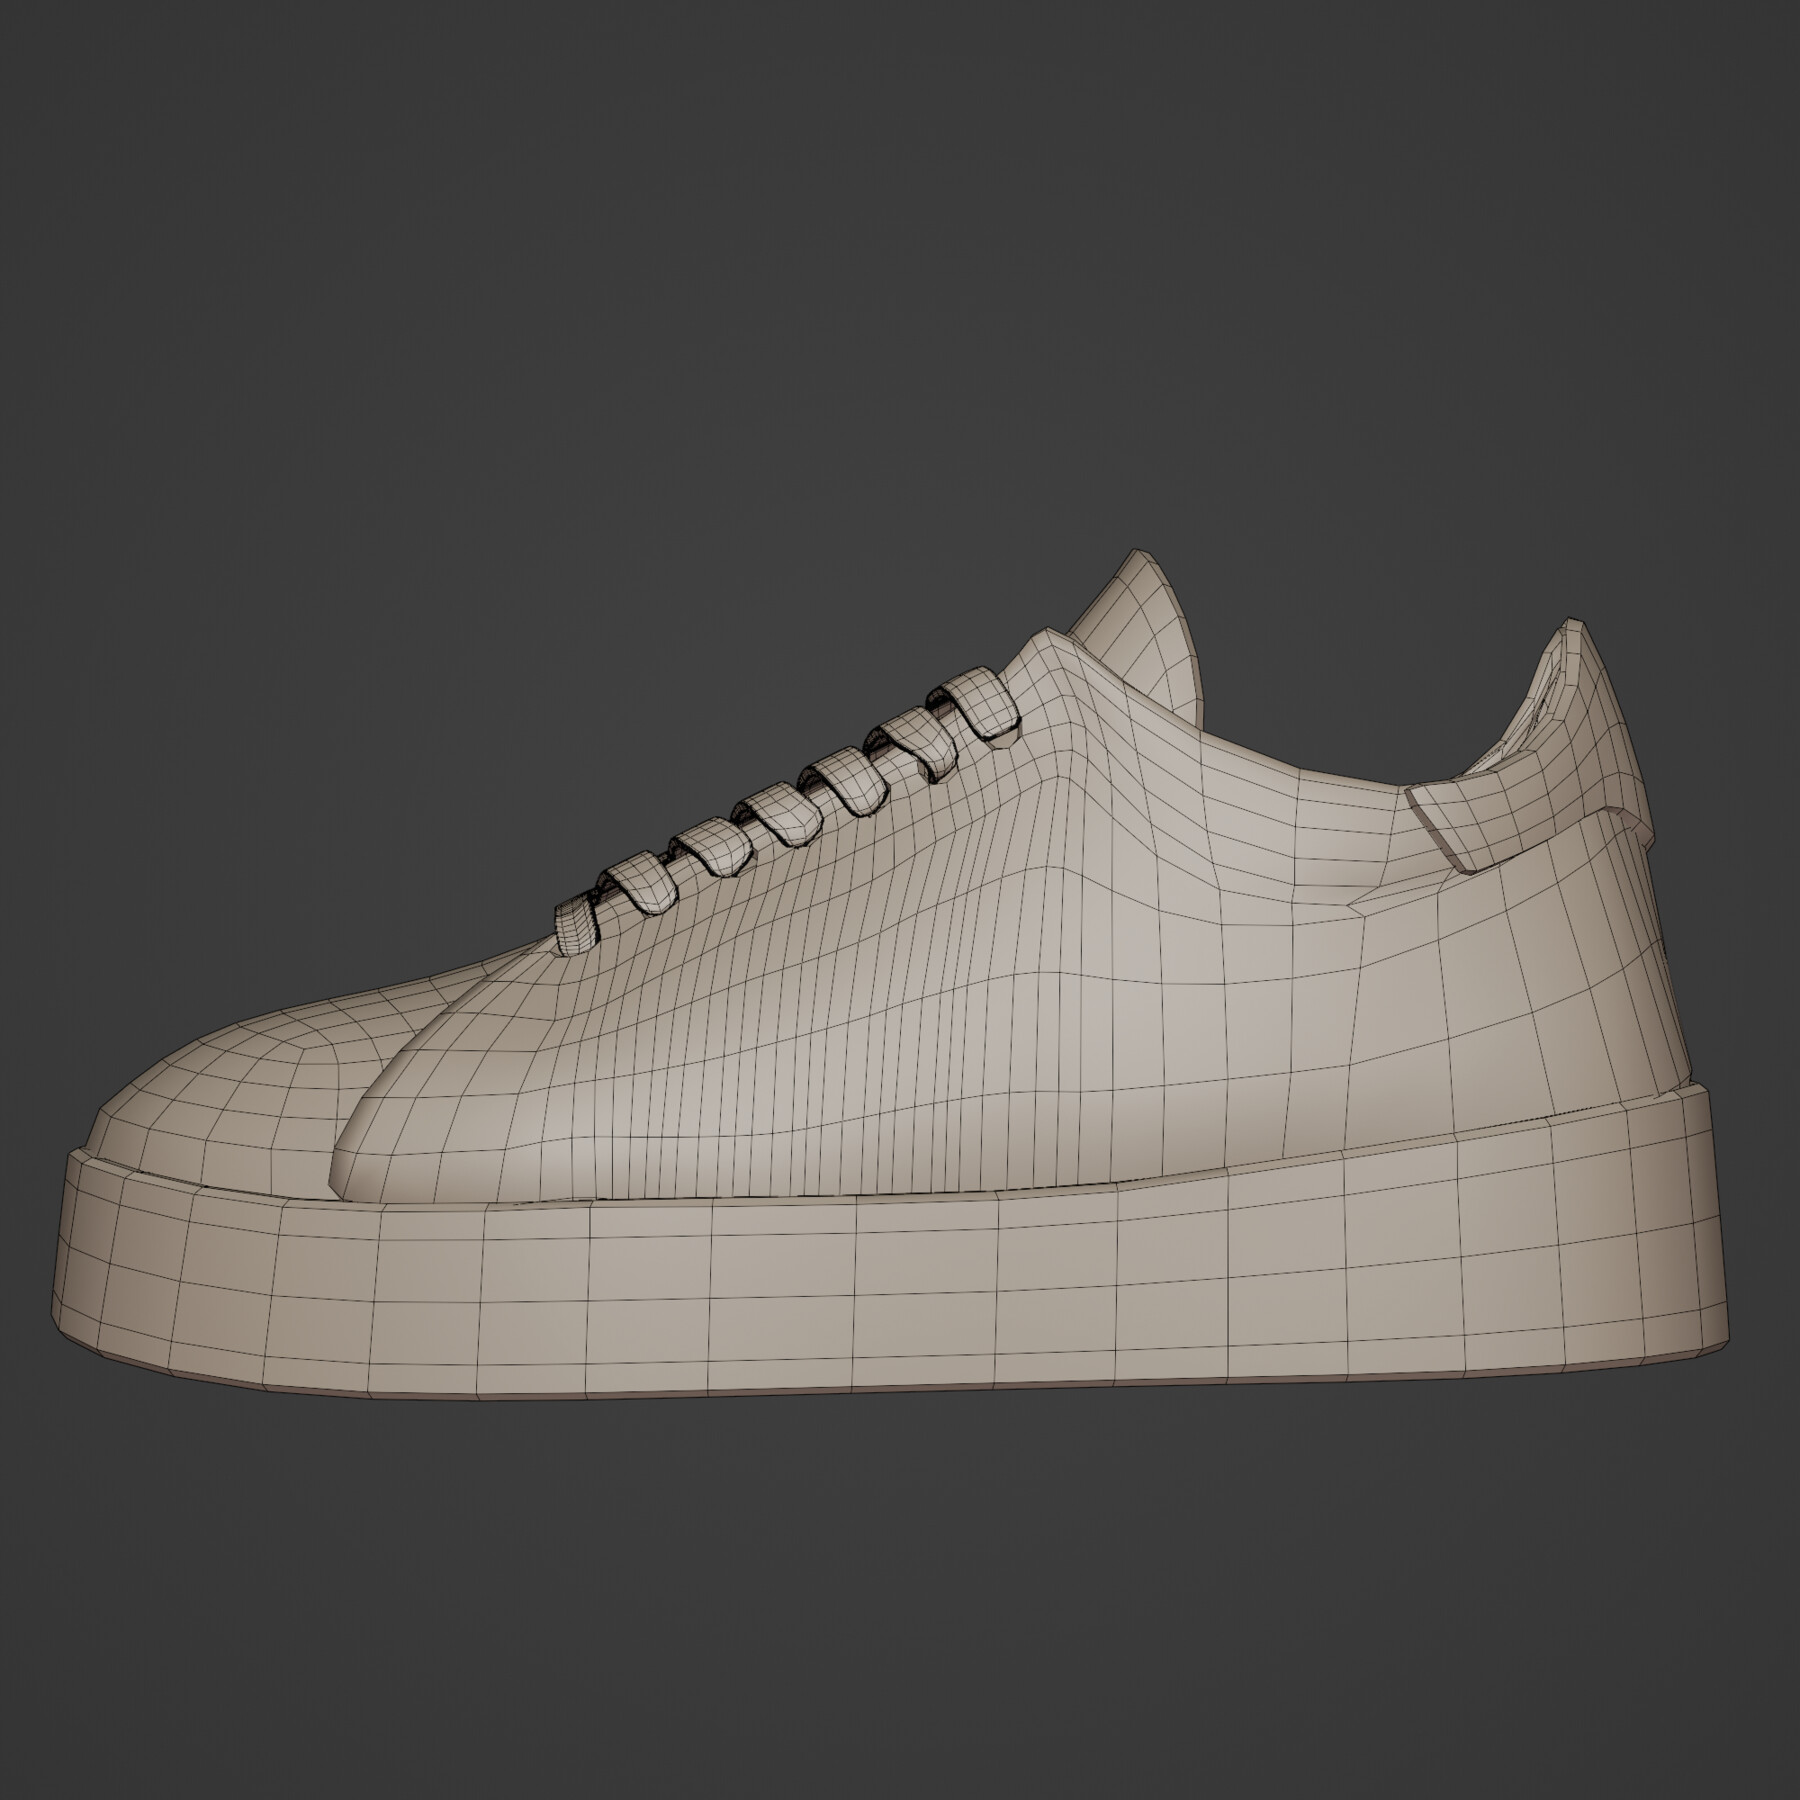 ArtStation - Casual Sneakers | Game Assets